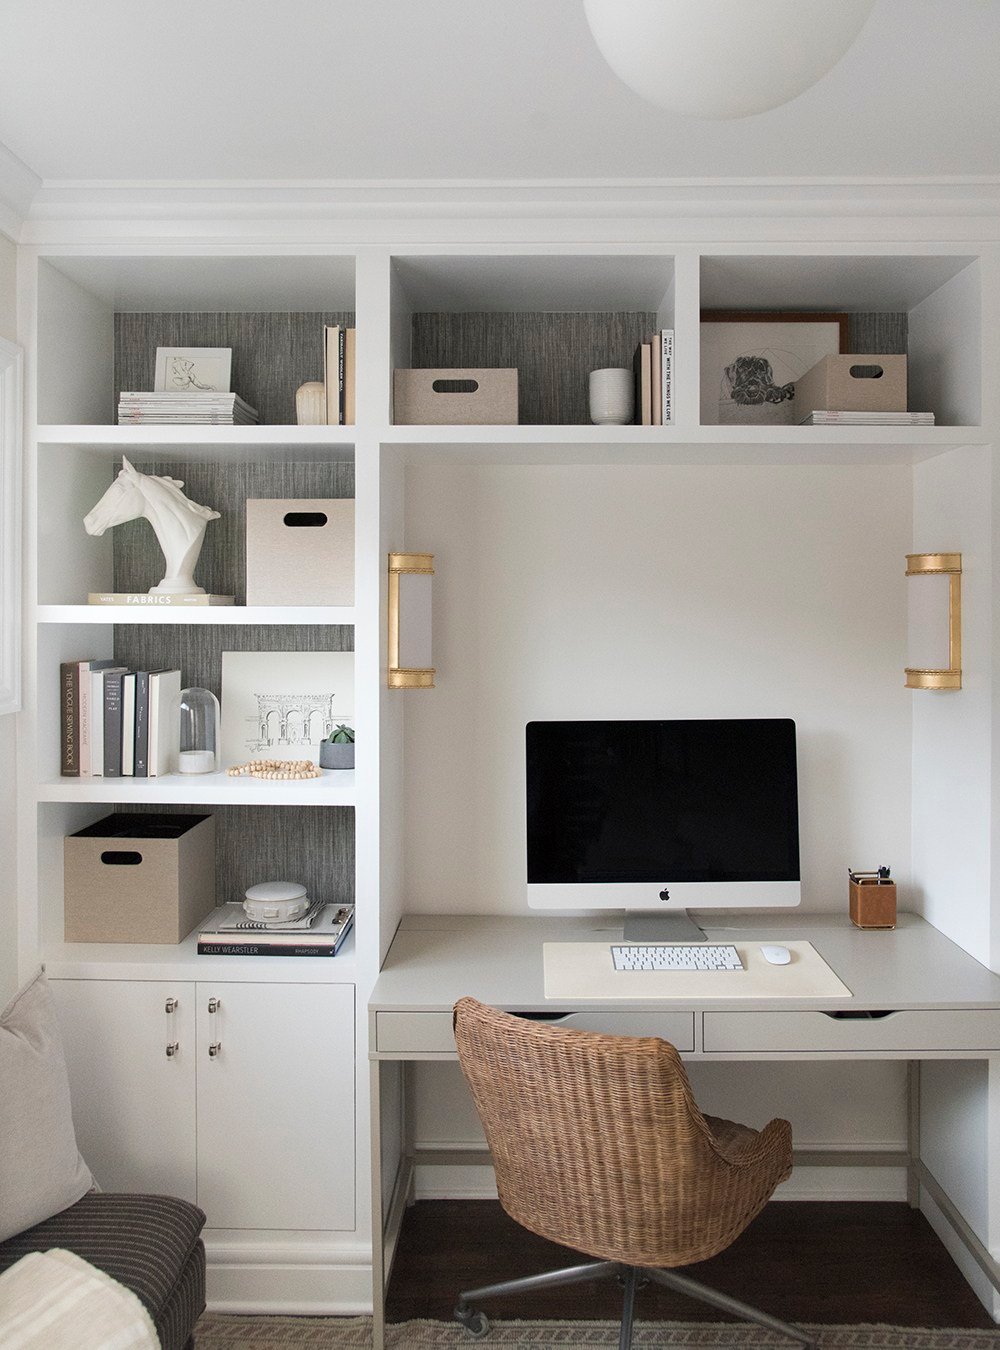 5 Tips for Working From Home + Home Office Furniture Roundup - roomfortuesday.com